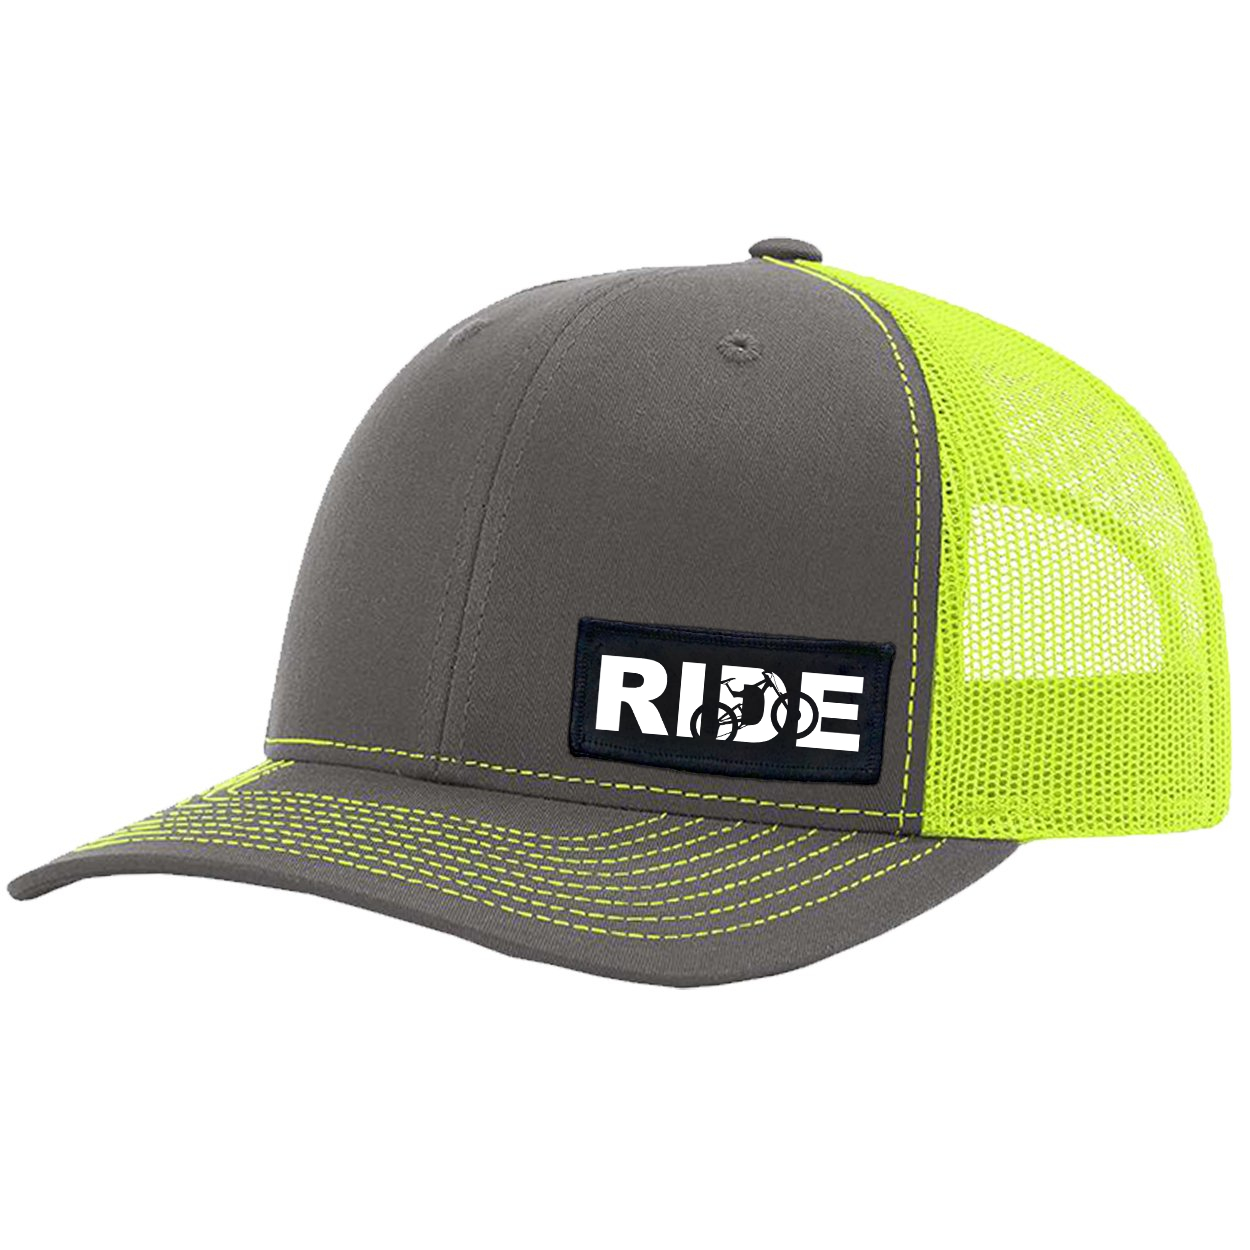 Ride MTB Logo Night Out Woven Patch Snapback Trucker Hat Charcoal/Neon Yellow (White Logo)